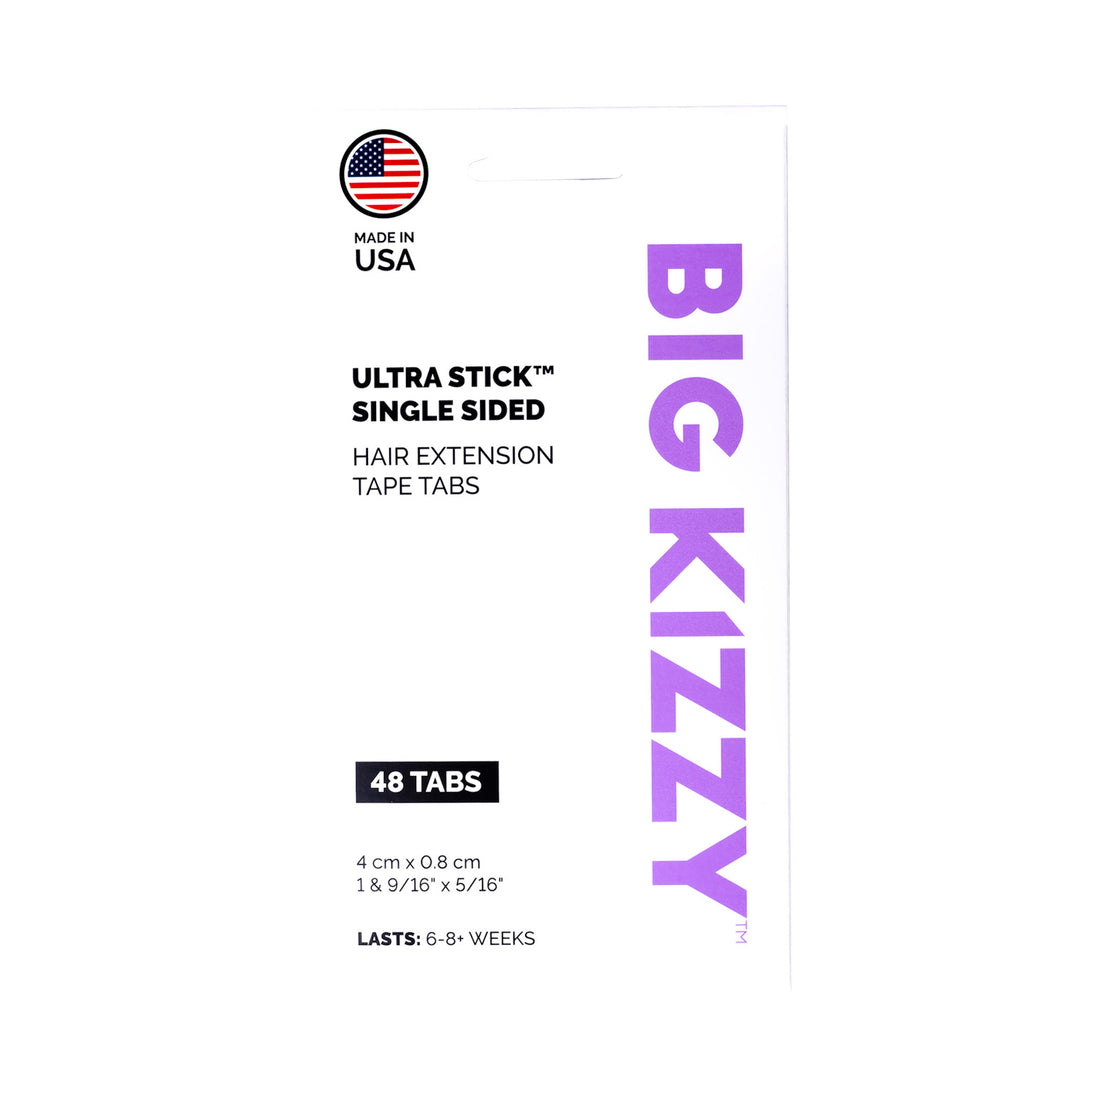 A pack of Big Kizzy® Ultra Stick Single Sided Hair Extension Replacement Tape Tabs, 48 tabs